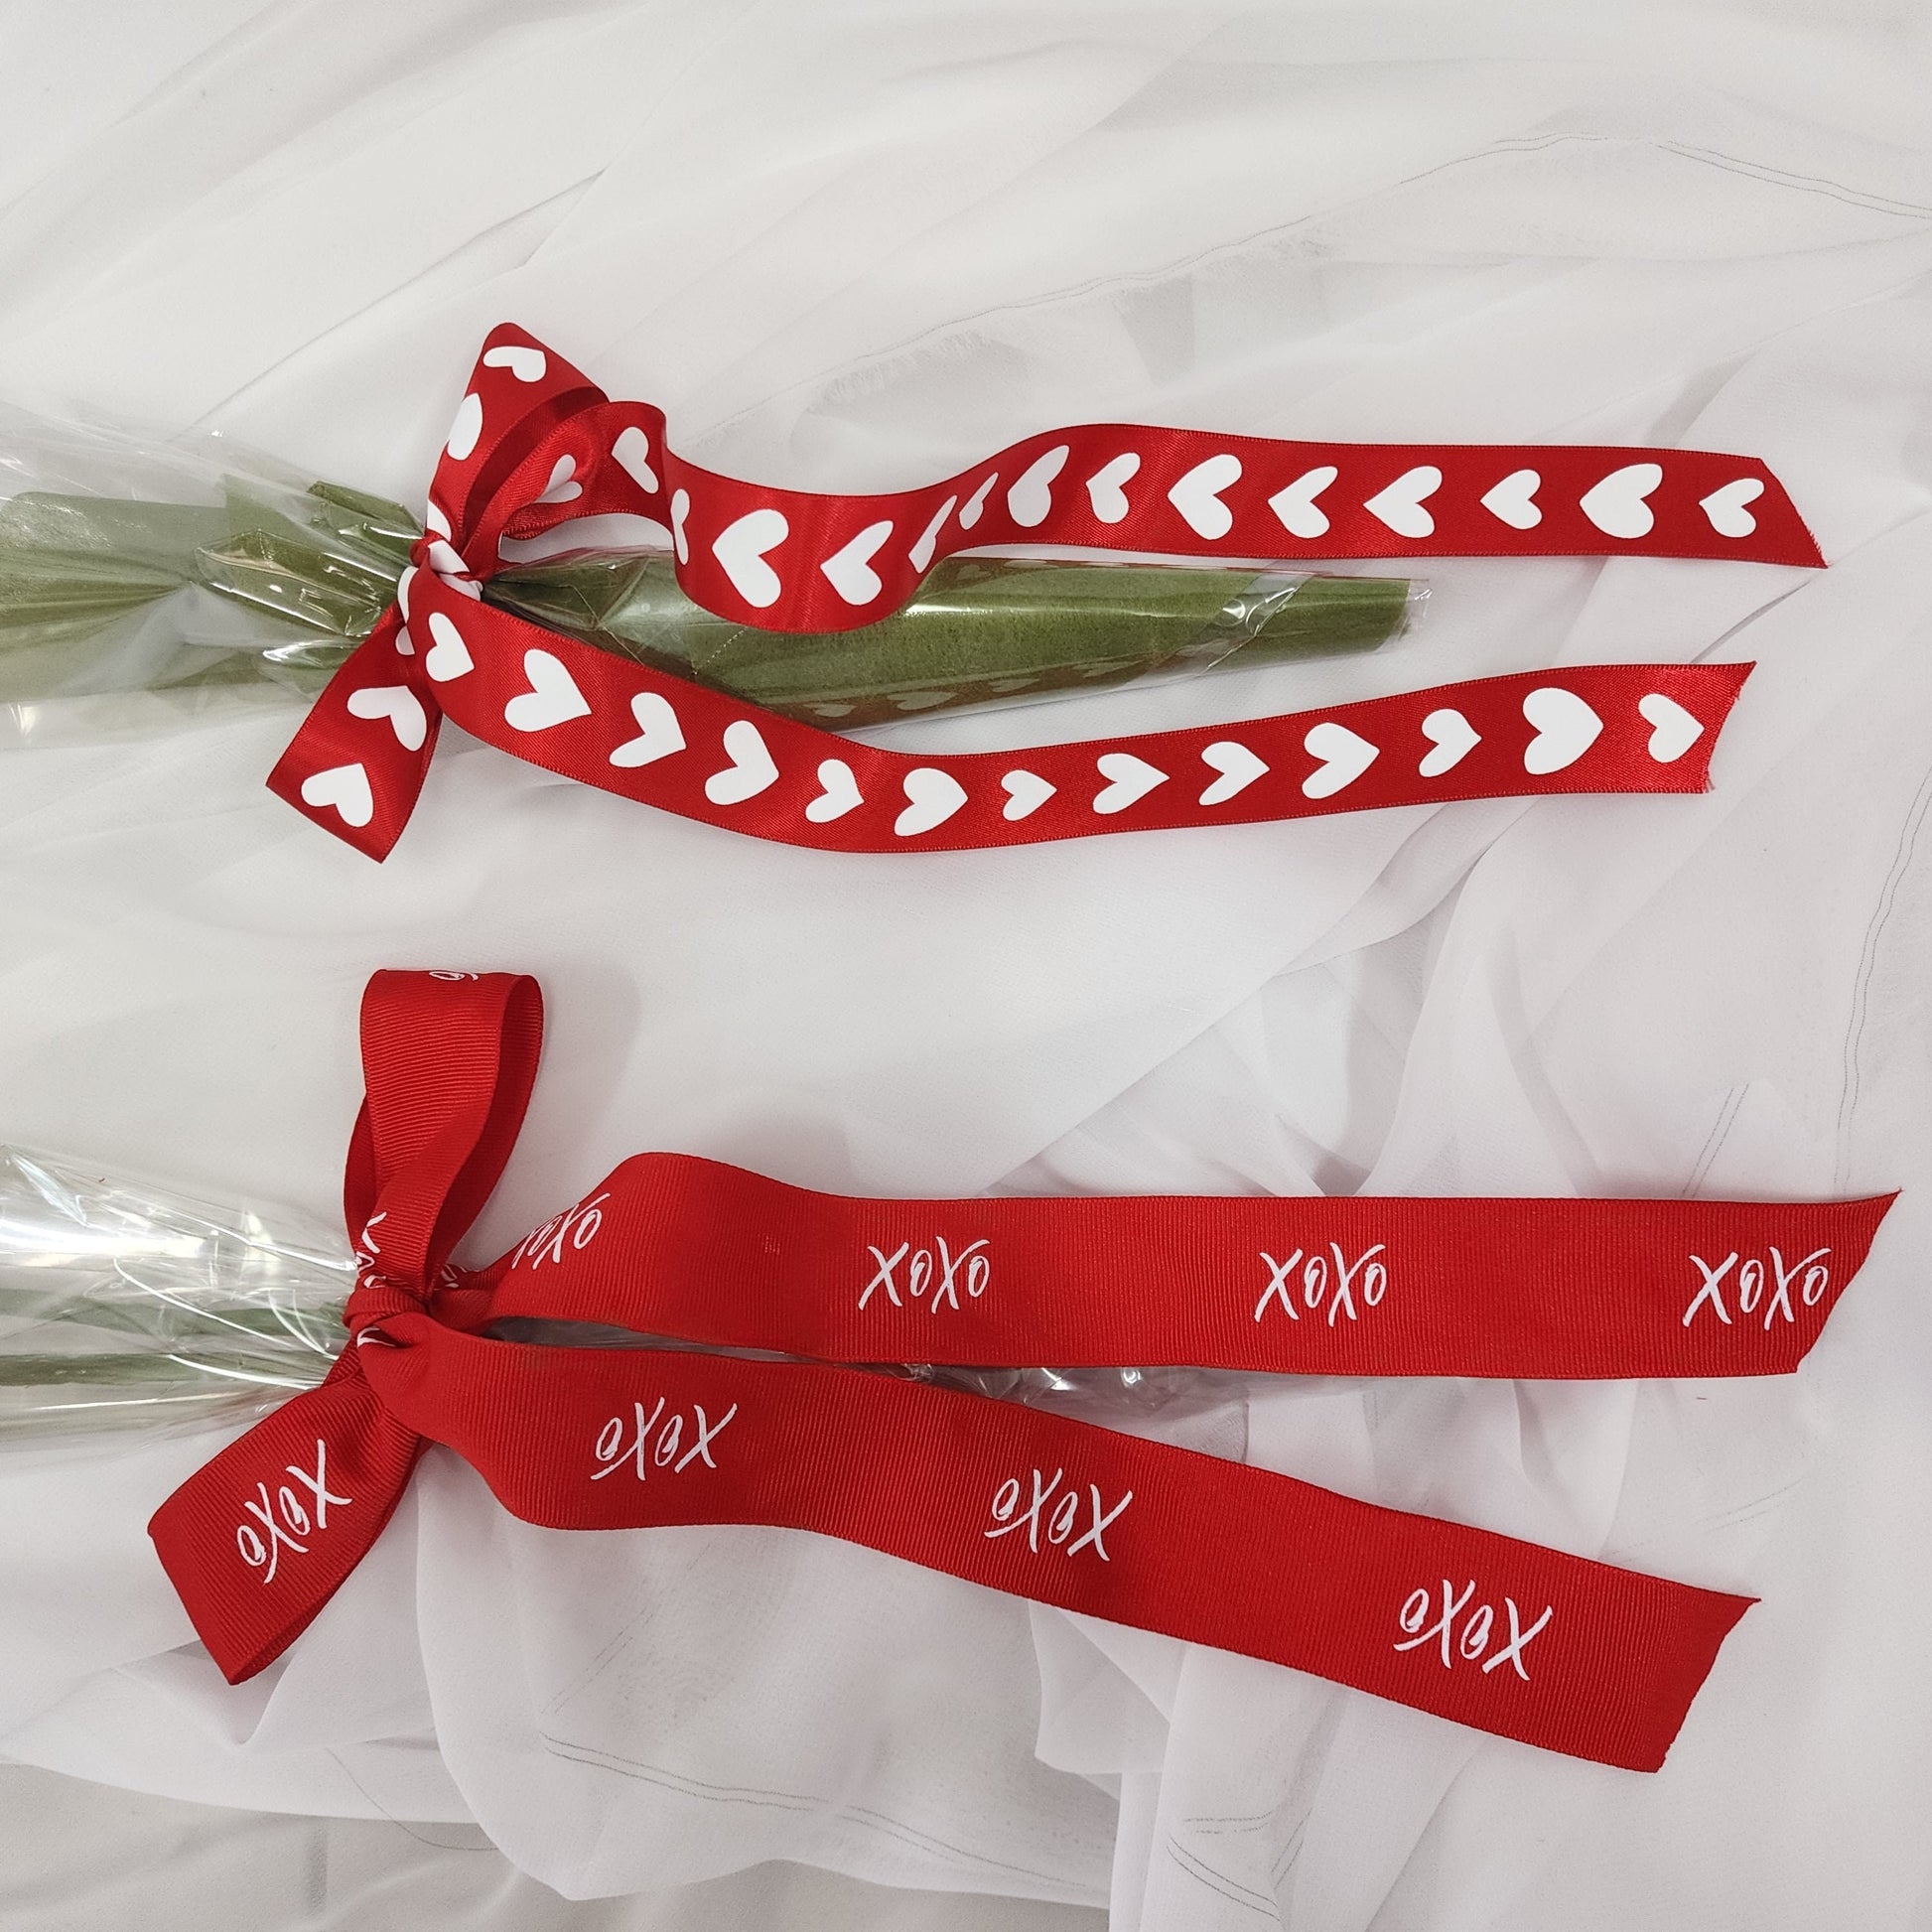 Gift Wrapped, Single, Real Touch, Red Rose - Realistic Artificial Flowers